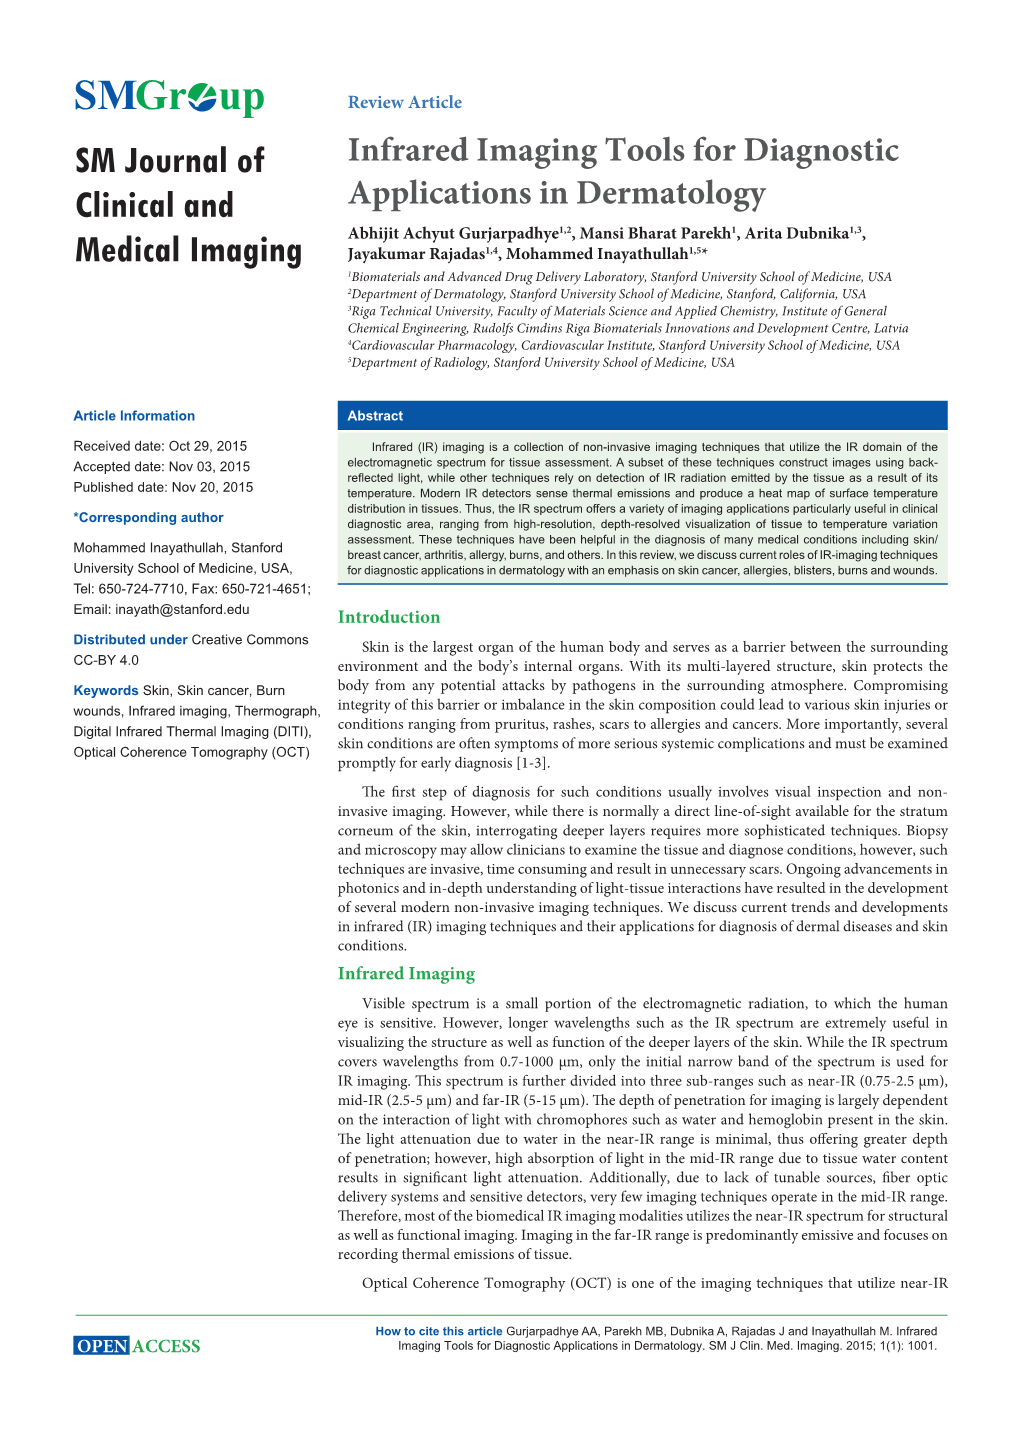 Infrared Imaging Tools for Diagnostic Applications in Dermatology